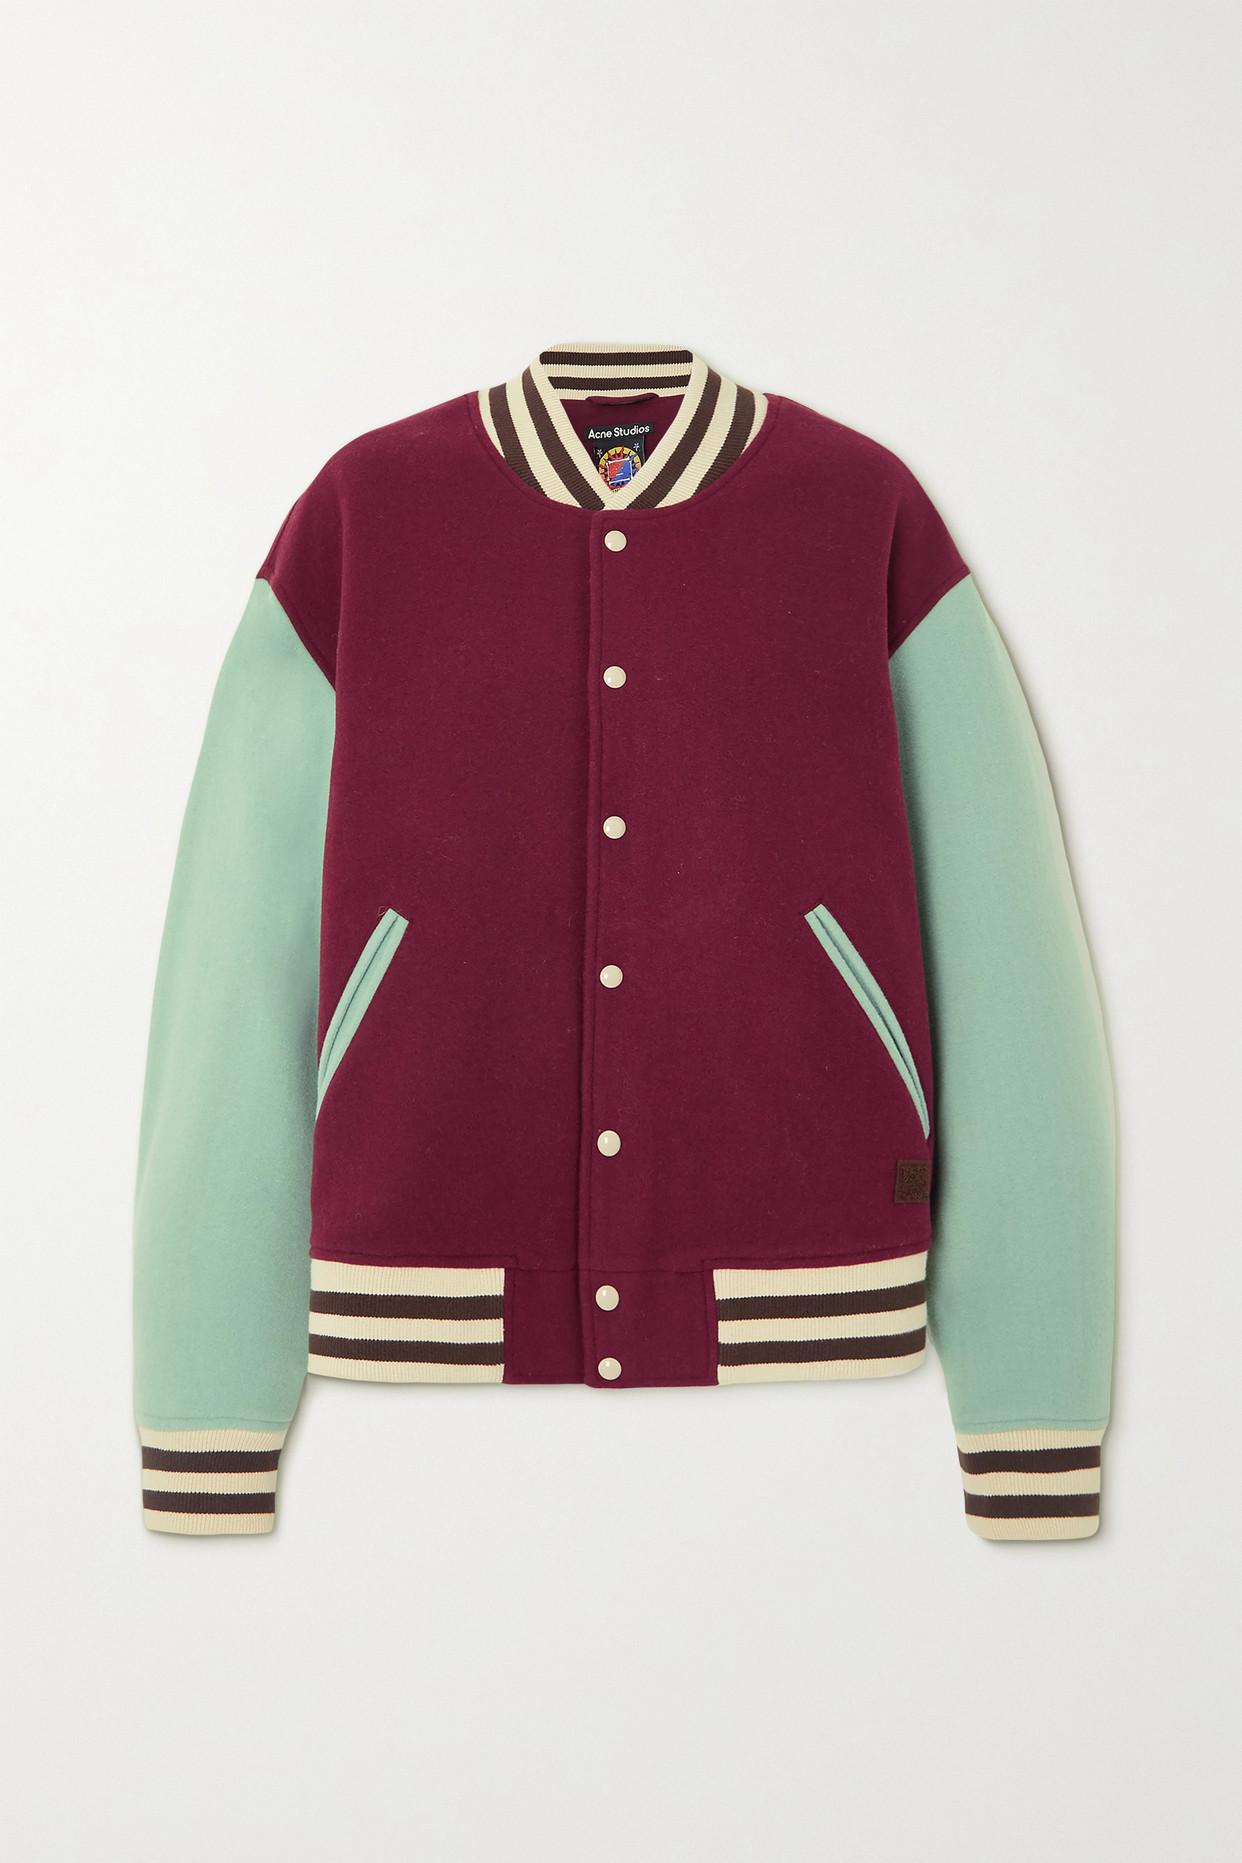 Acne Studios Oversized Padded Wool-blend Bomber Jacket in Red | Lyst